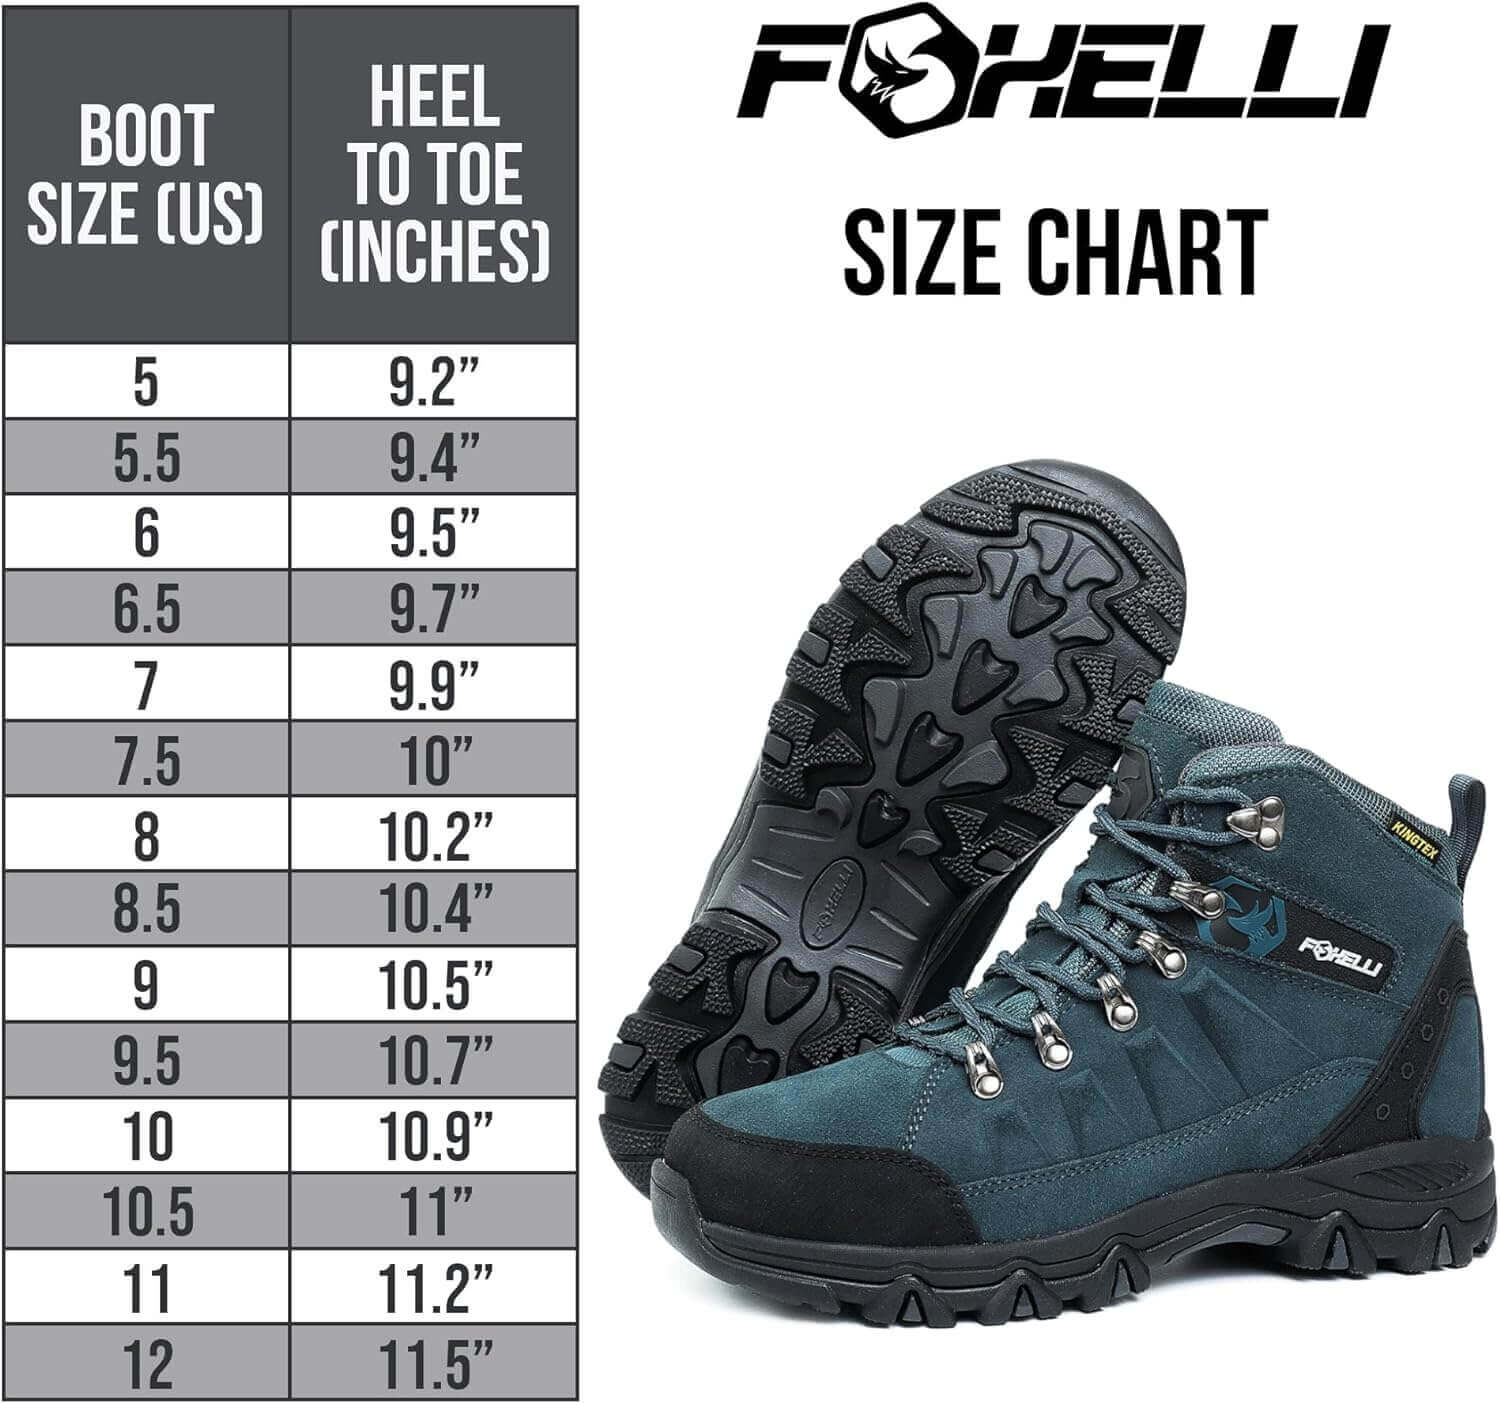 Shop The Latest >Foxelli Women’s Breathable, Waterproof Hiking Boots > *Only $161.96*> From The Top Brand > *Foxellil* > Shop Now and Get Free Shipping On Orders Over $45.00 >*Shop Earth Foot*